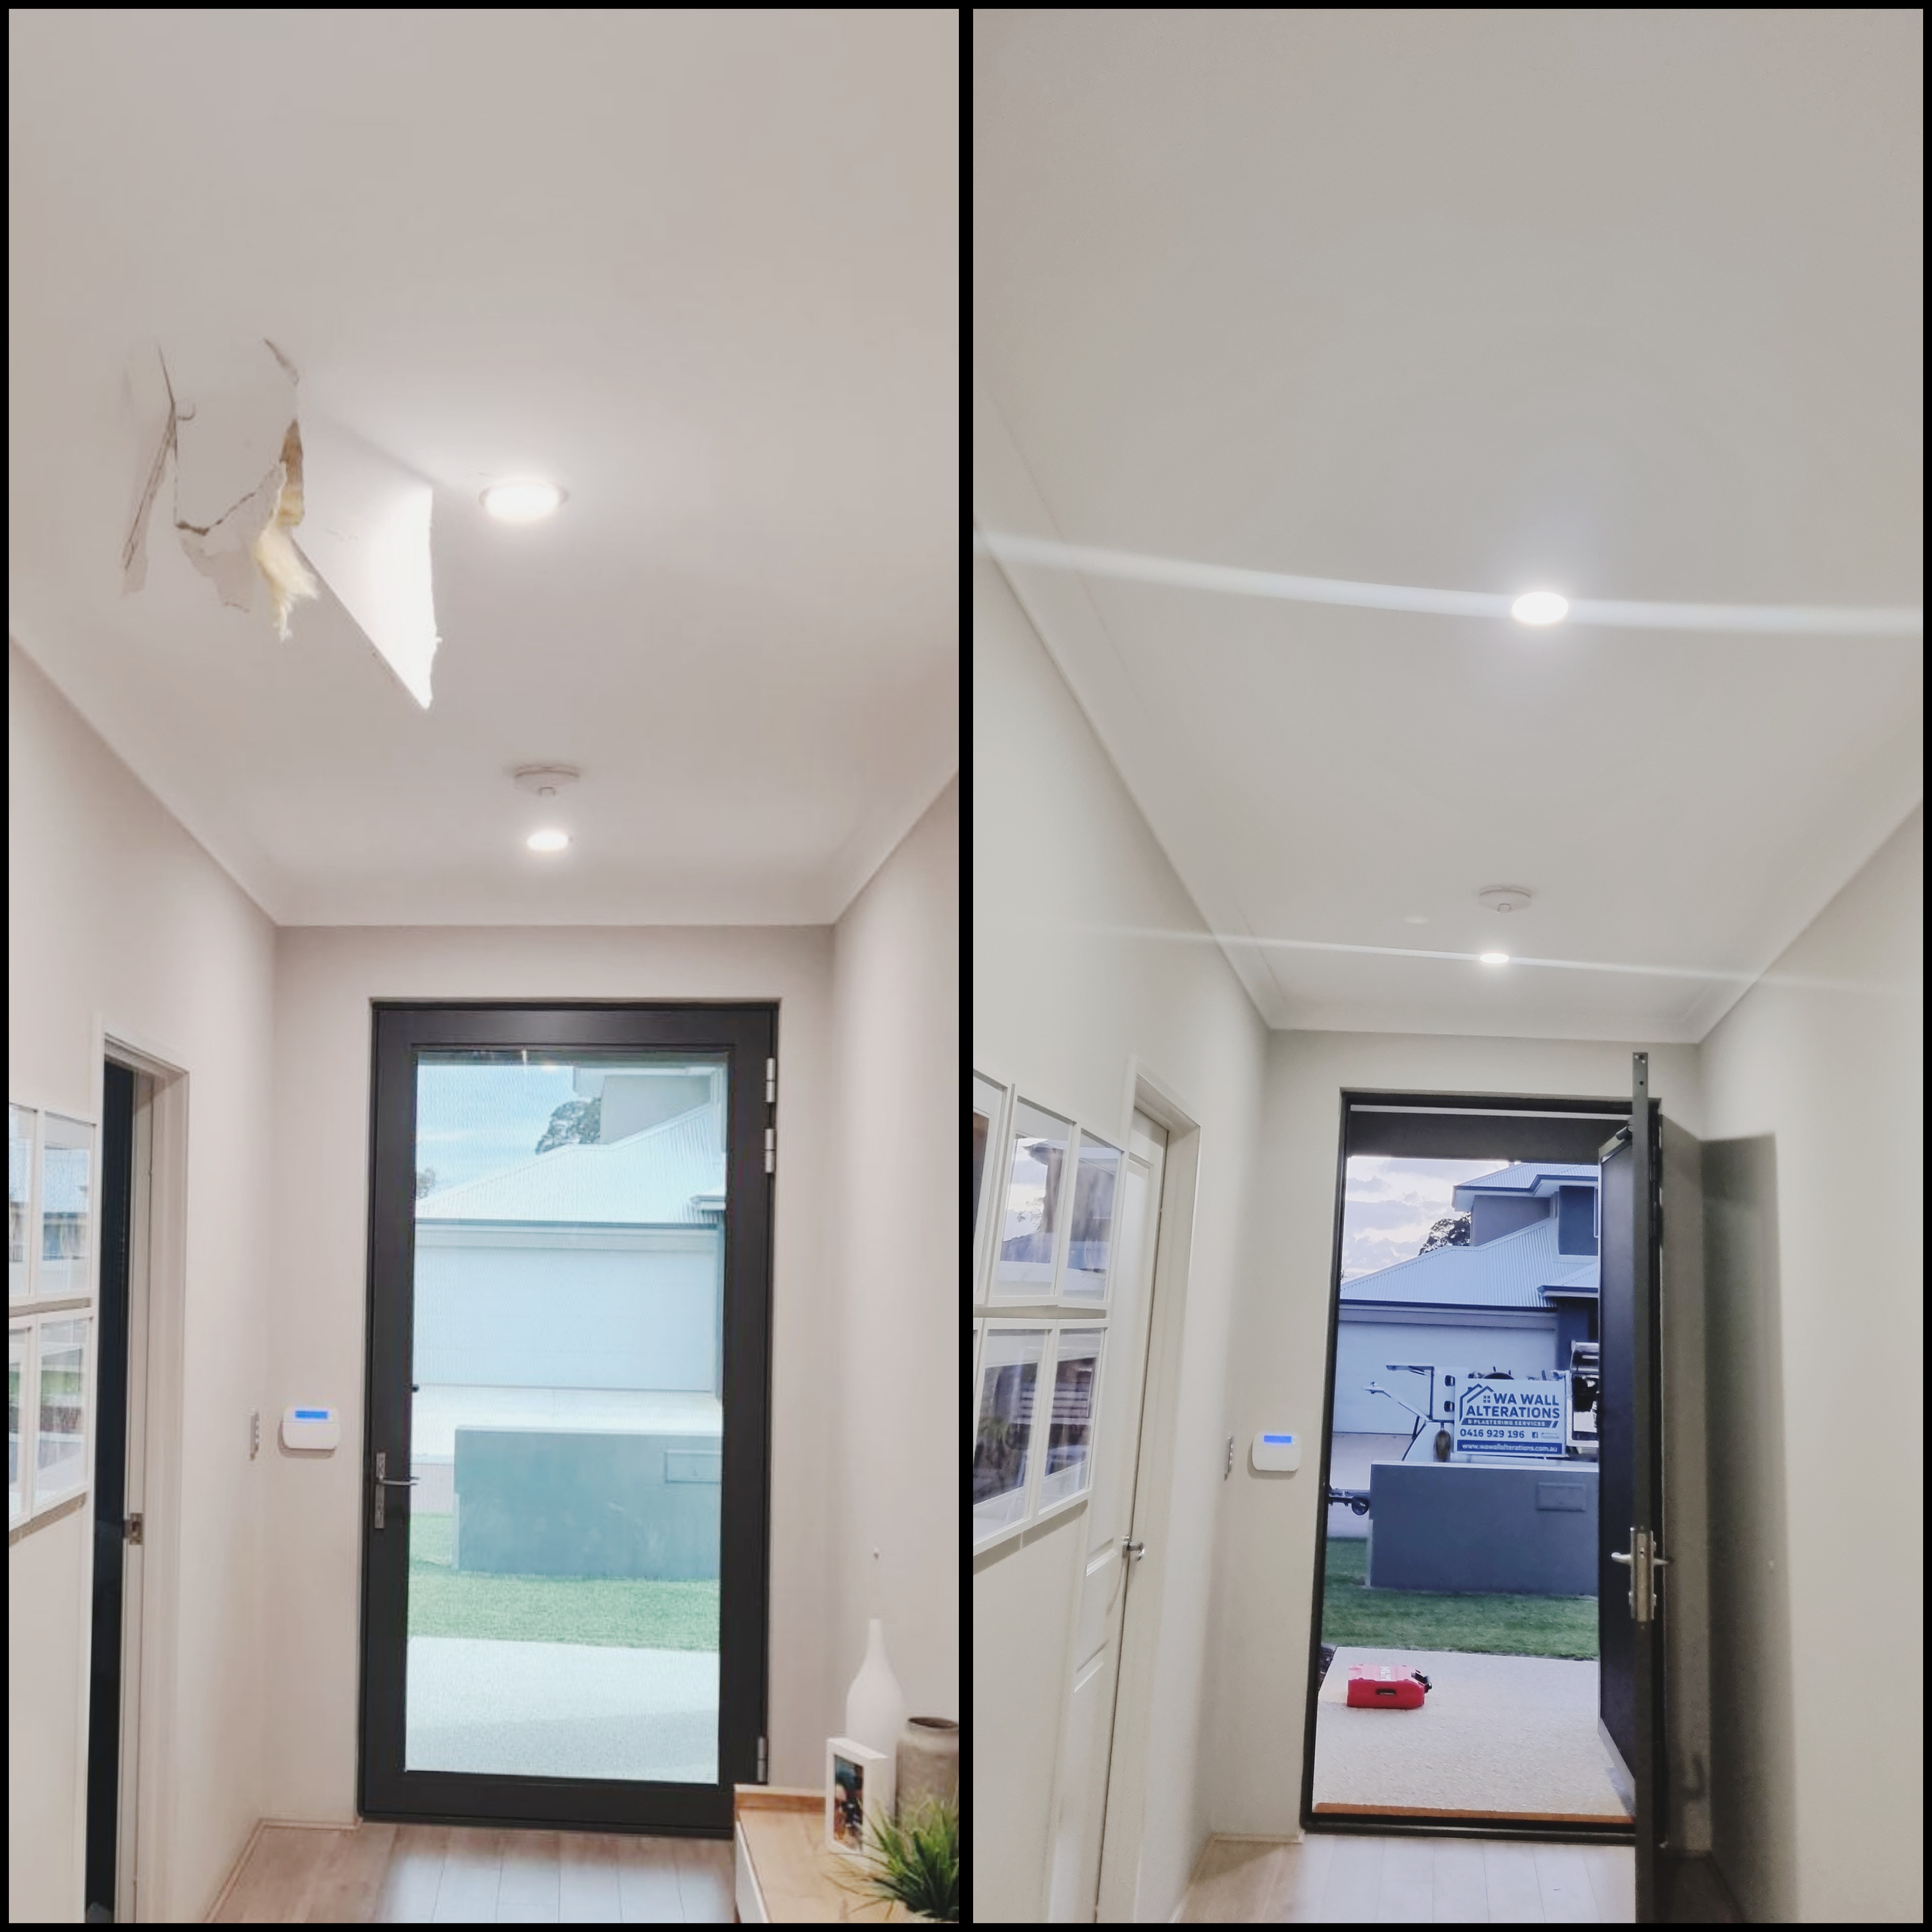 celling repair and paint